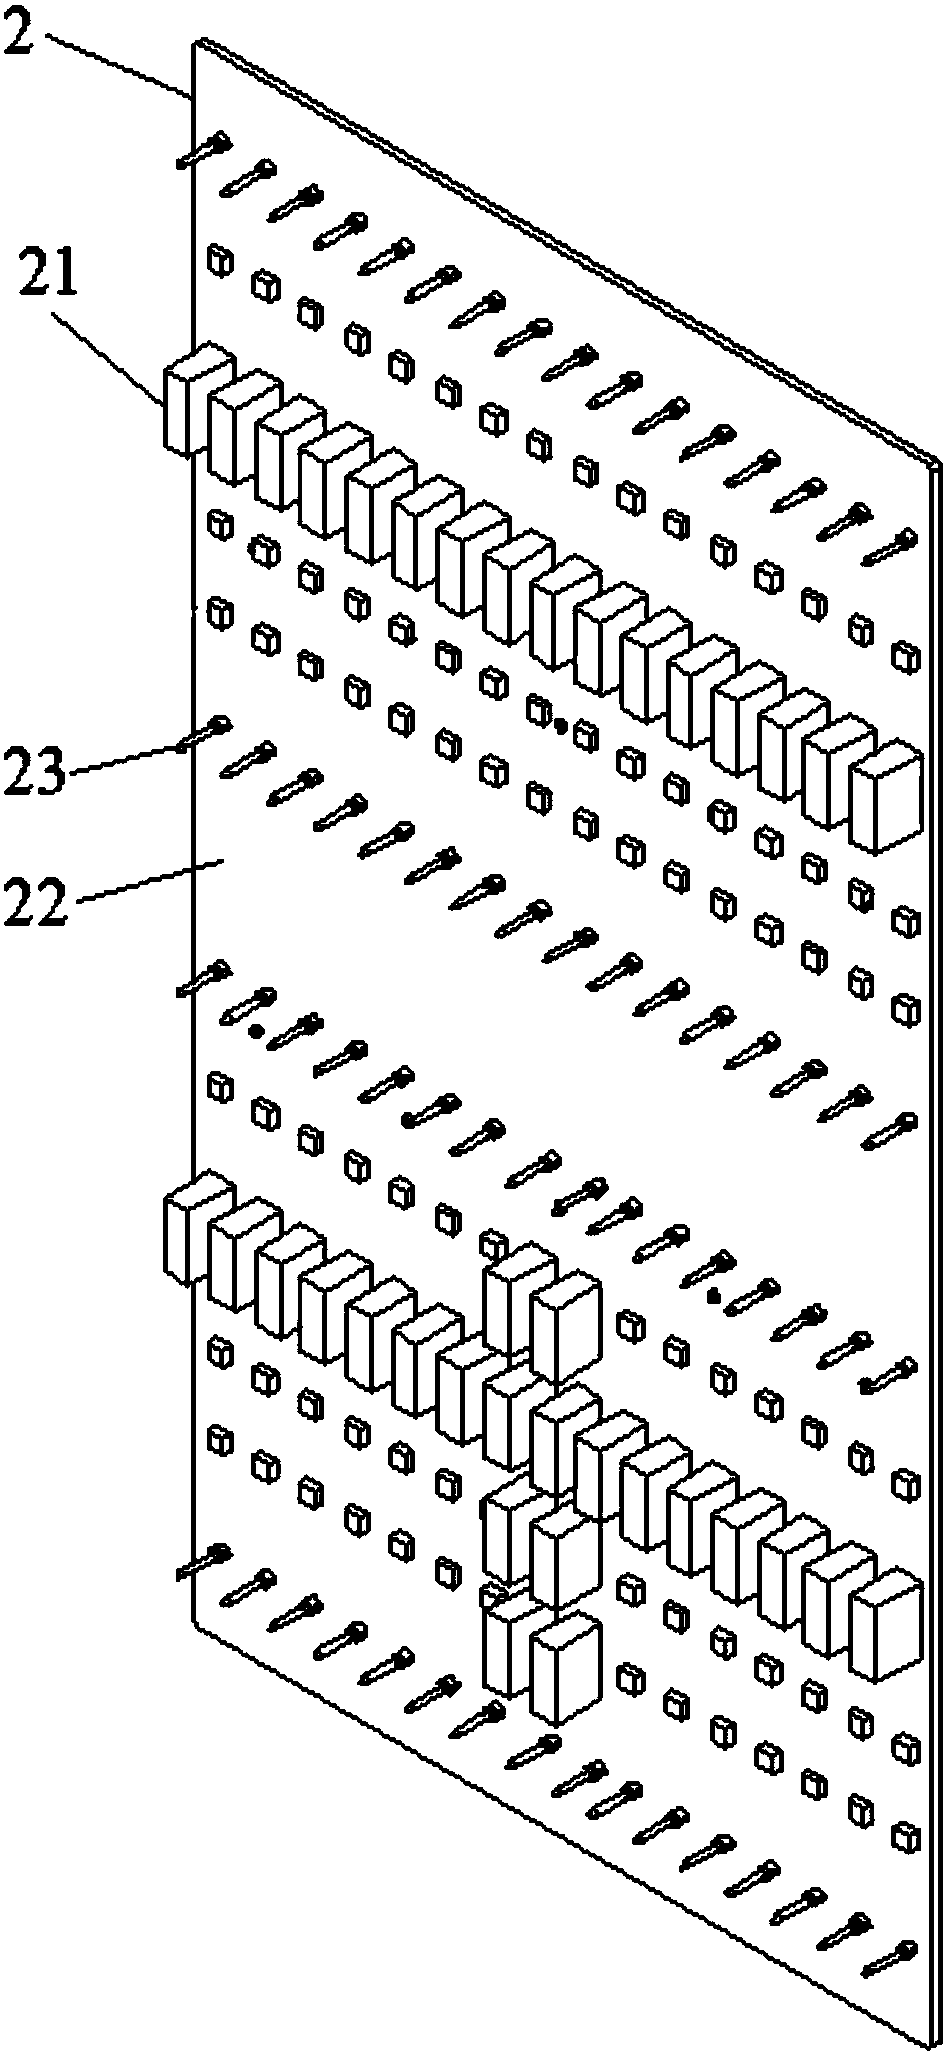 Optical backplane interconnect system